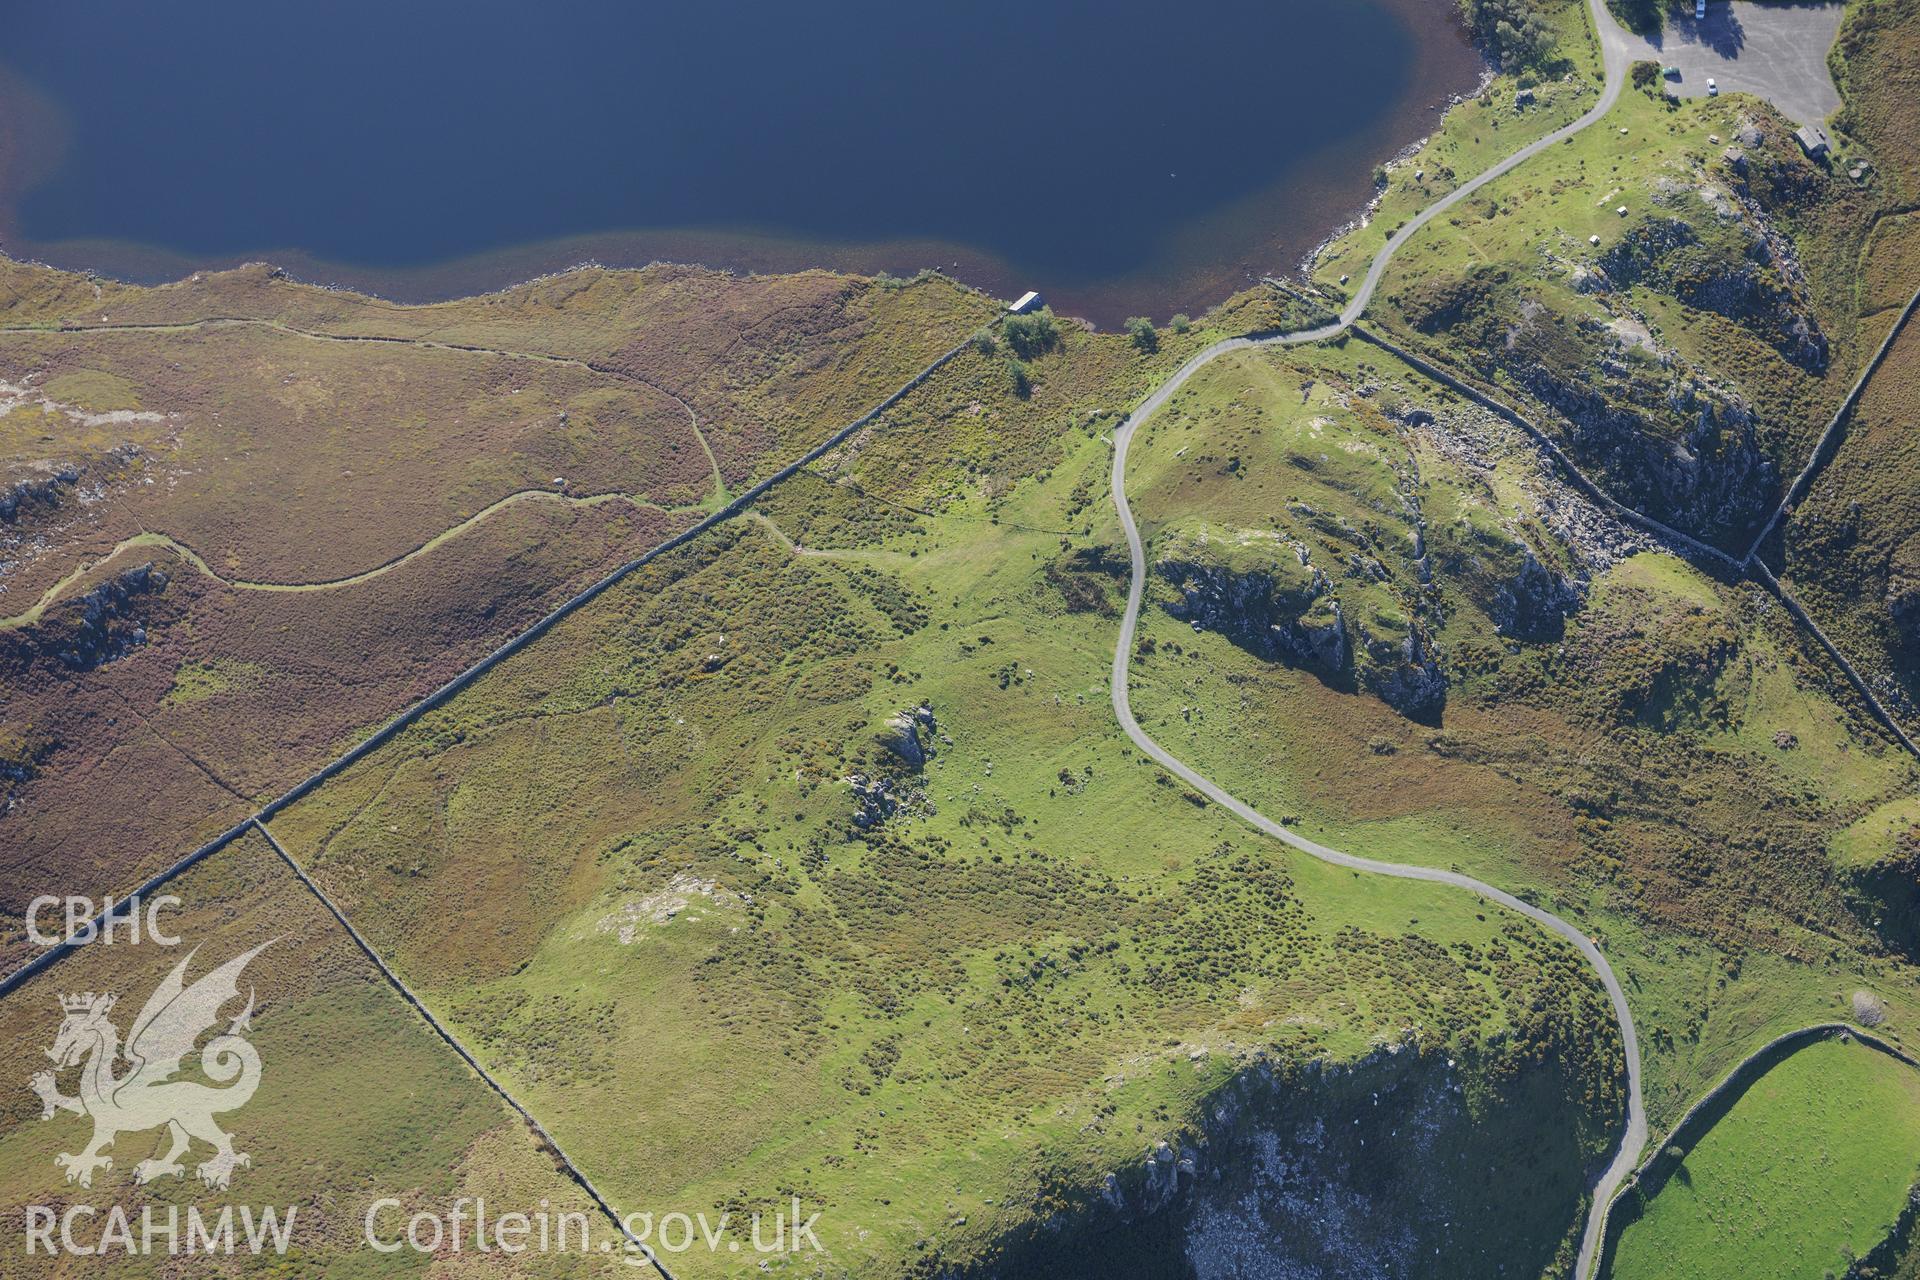 Two cairns and remains of drystone building at Llynnau Cregennen on the slopes of Cadair Idris. Oblique aerial photograph taken during the Royal Commission's programme of archaeological aerial reconnaissance by Toby Driver on 2nd October 2015.